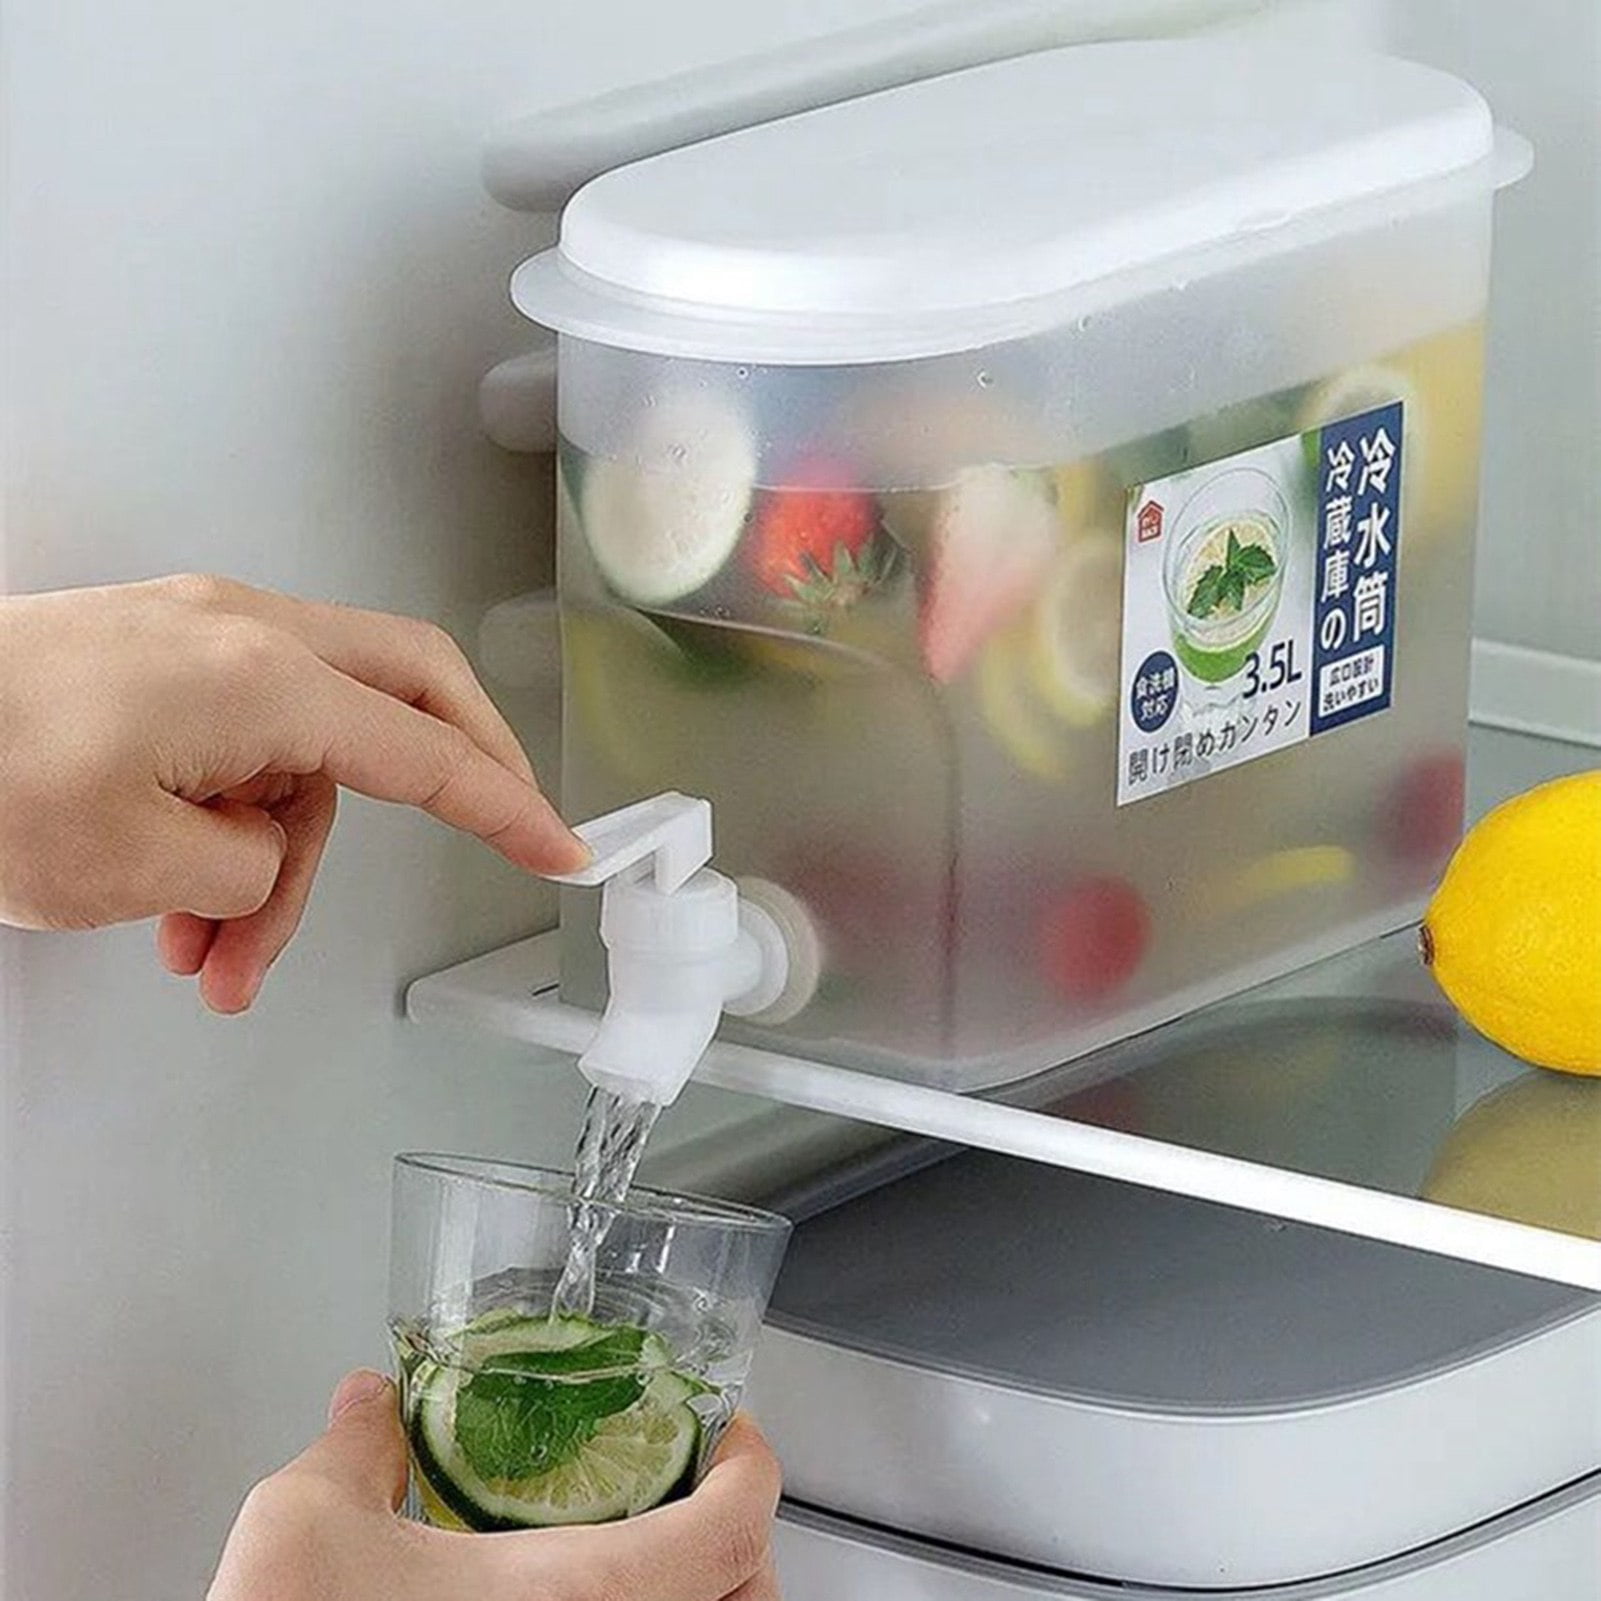 3.5L Drinks Dispenser With Tap Refrigerator Cold Kettle Fruit Teapot with Faucet Ice Water Bucket WaterJug Water Container Leak Free Fridge Water Dispenser for Making Teas and Juices BPA-Free